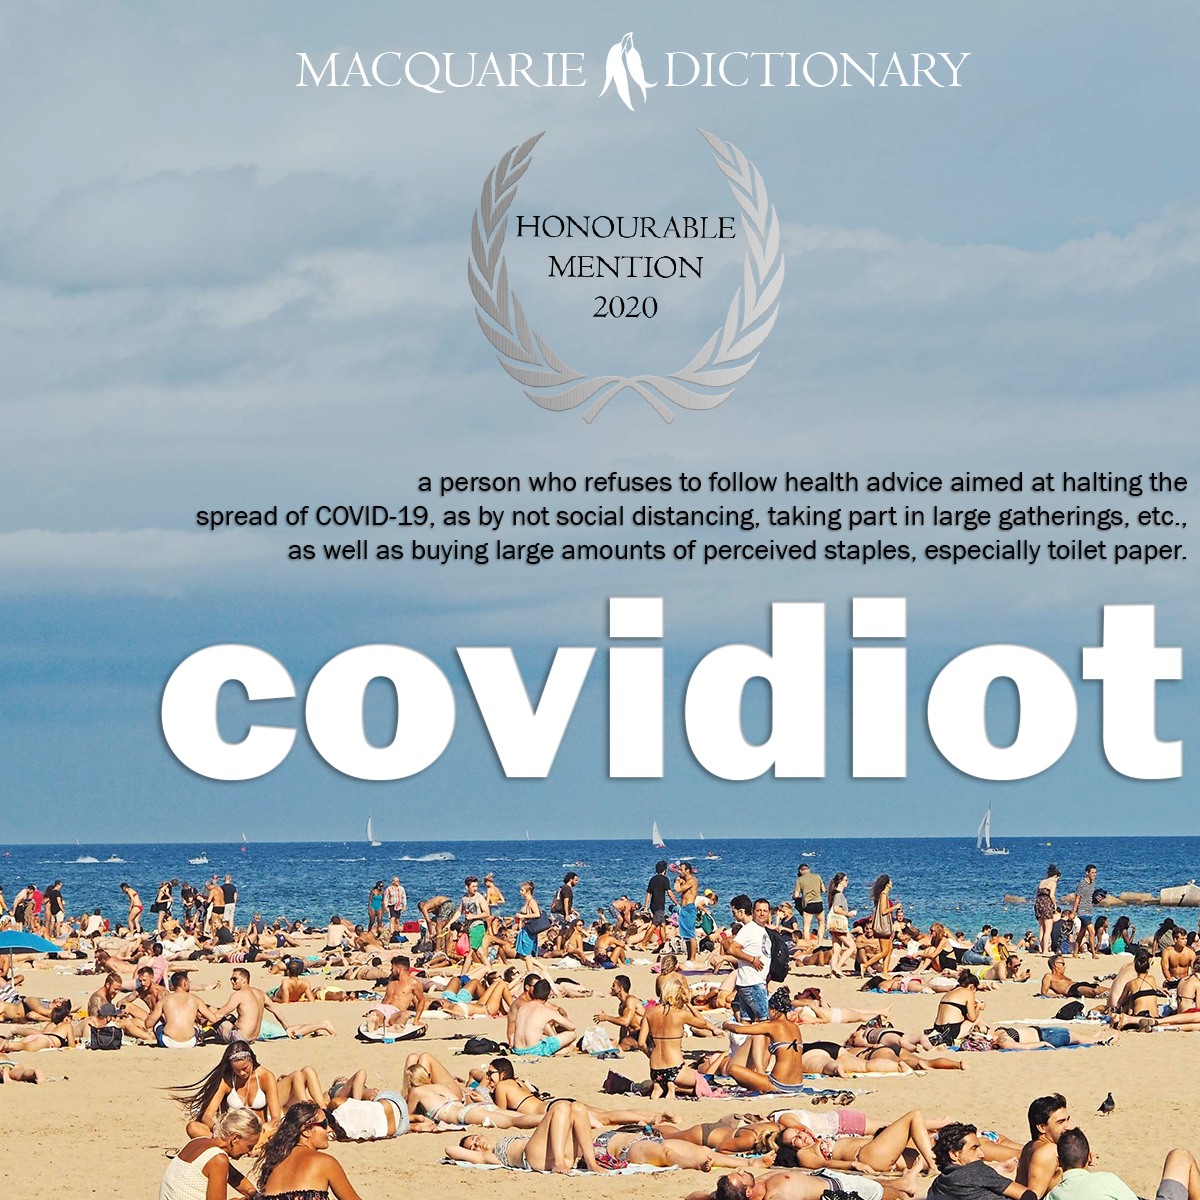 otcovidi - a person who doesn't abide by new restrictions to help stop the spread of COVID-19